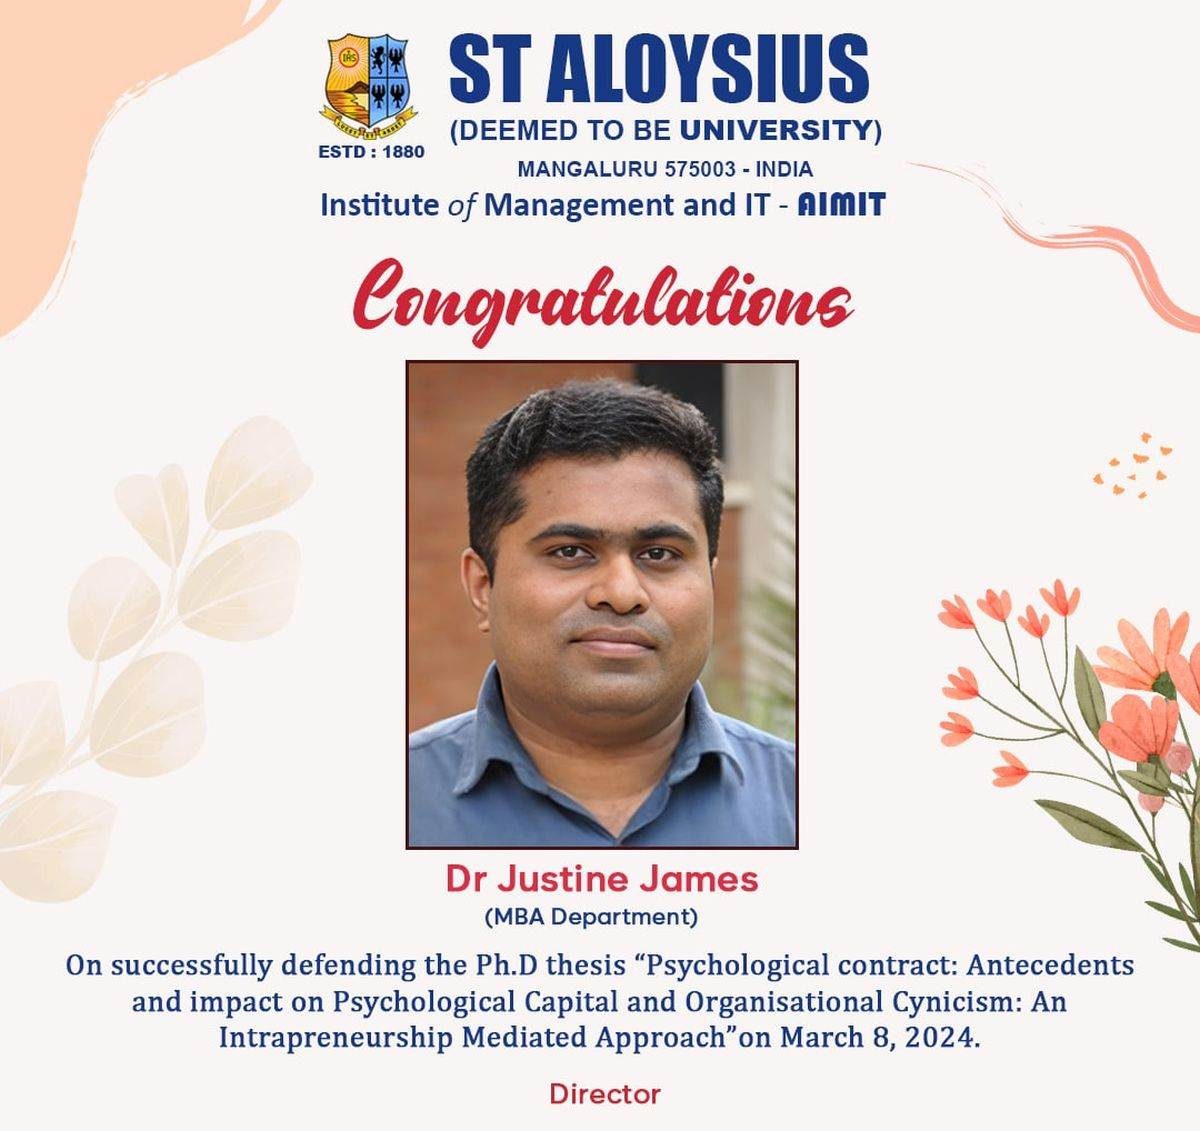 Aimit wishes Heartly Congratulations to Dr. Justin James